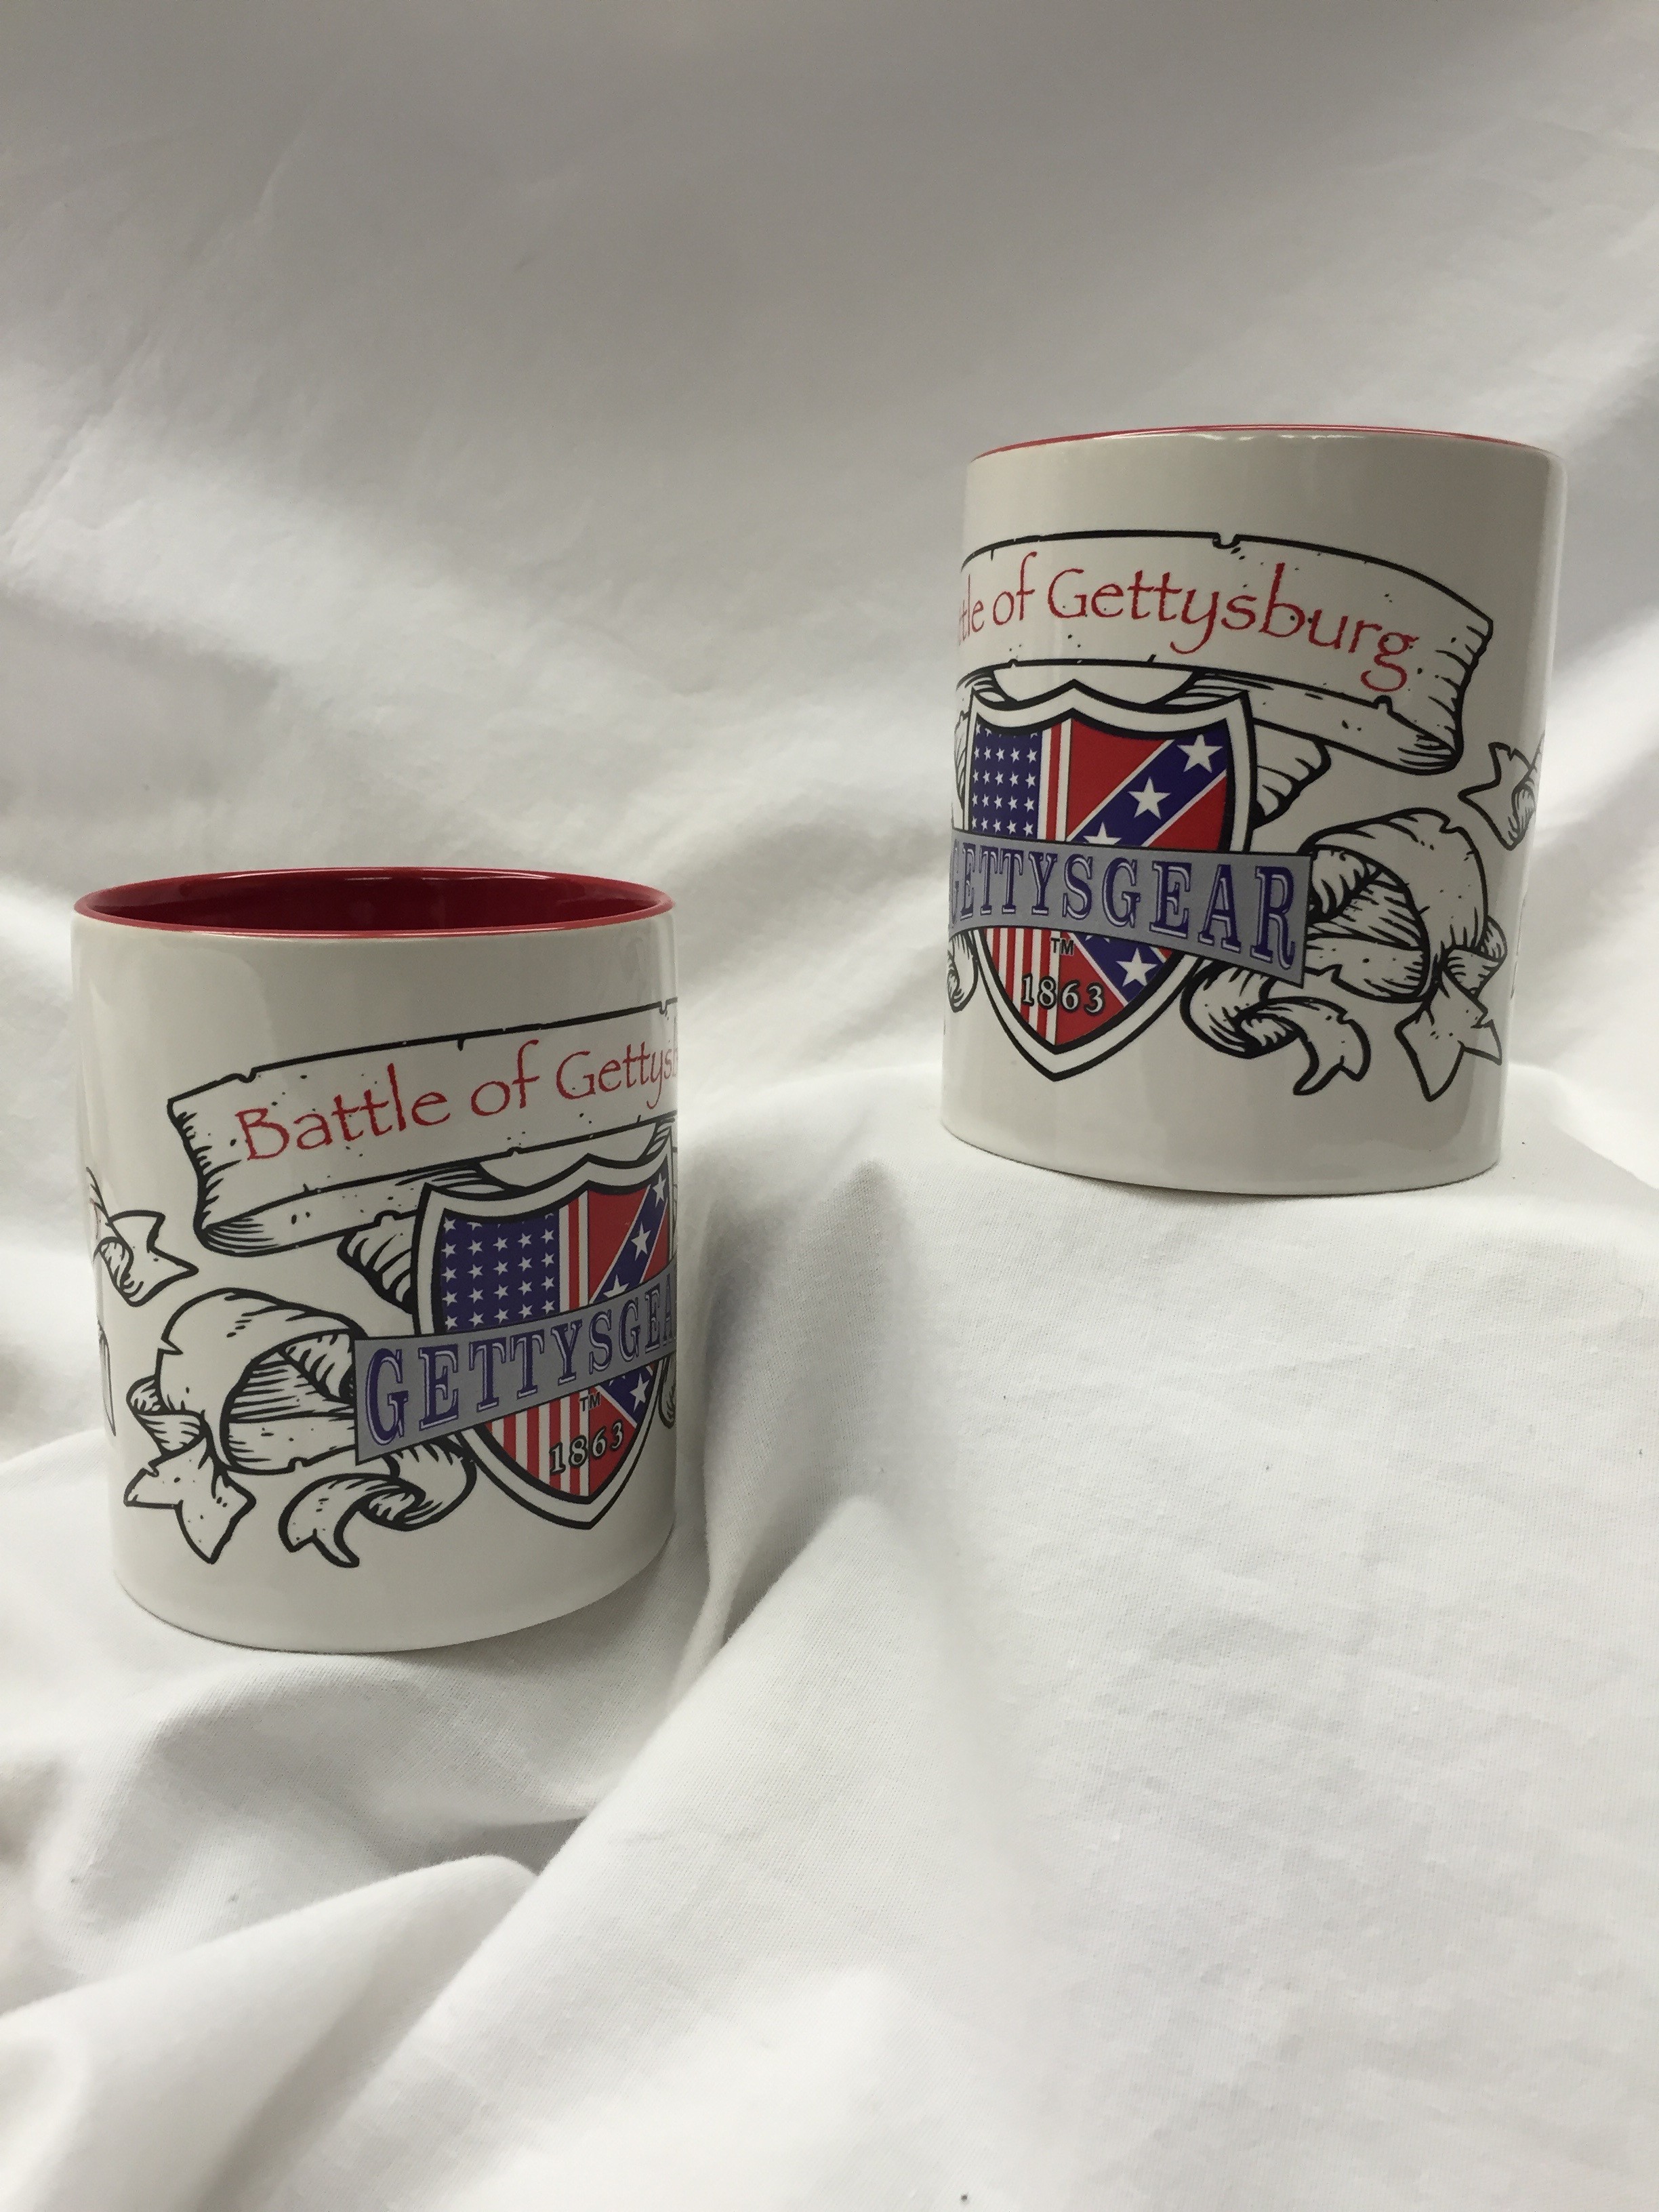 Hand-made gifts that celebrate the history of Gettysburg.